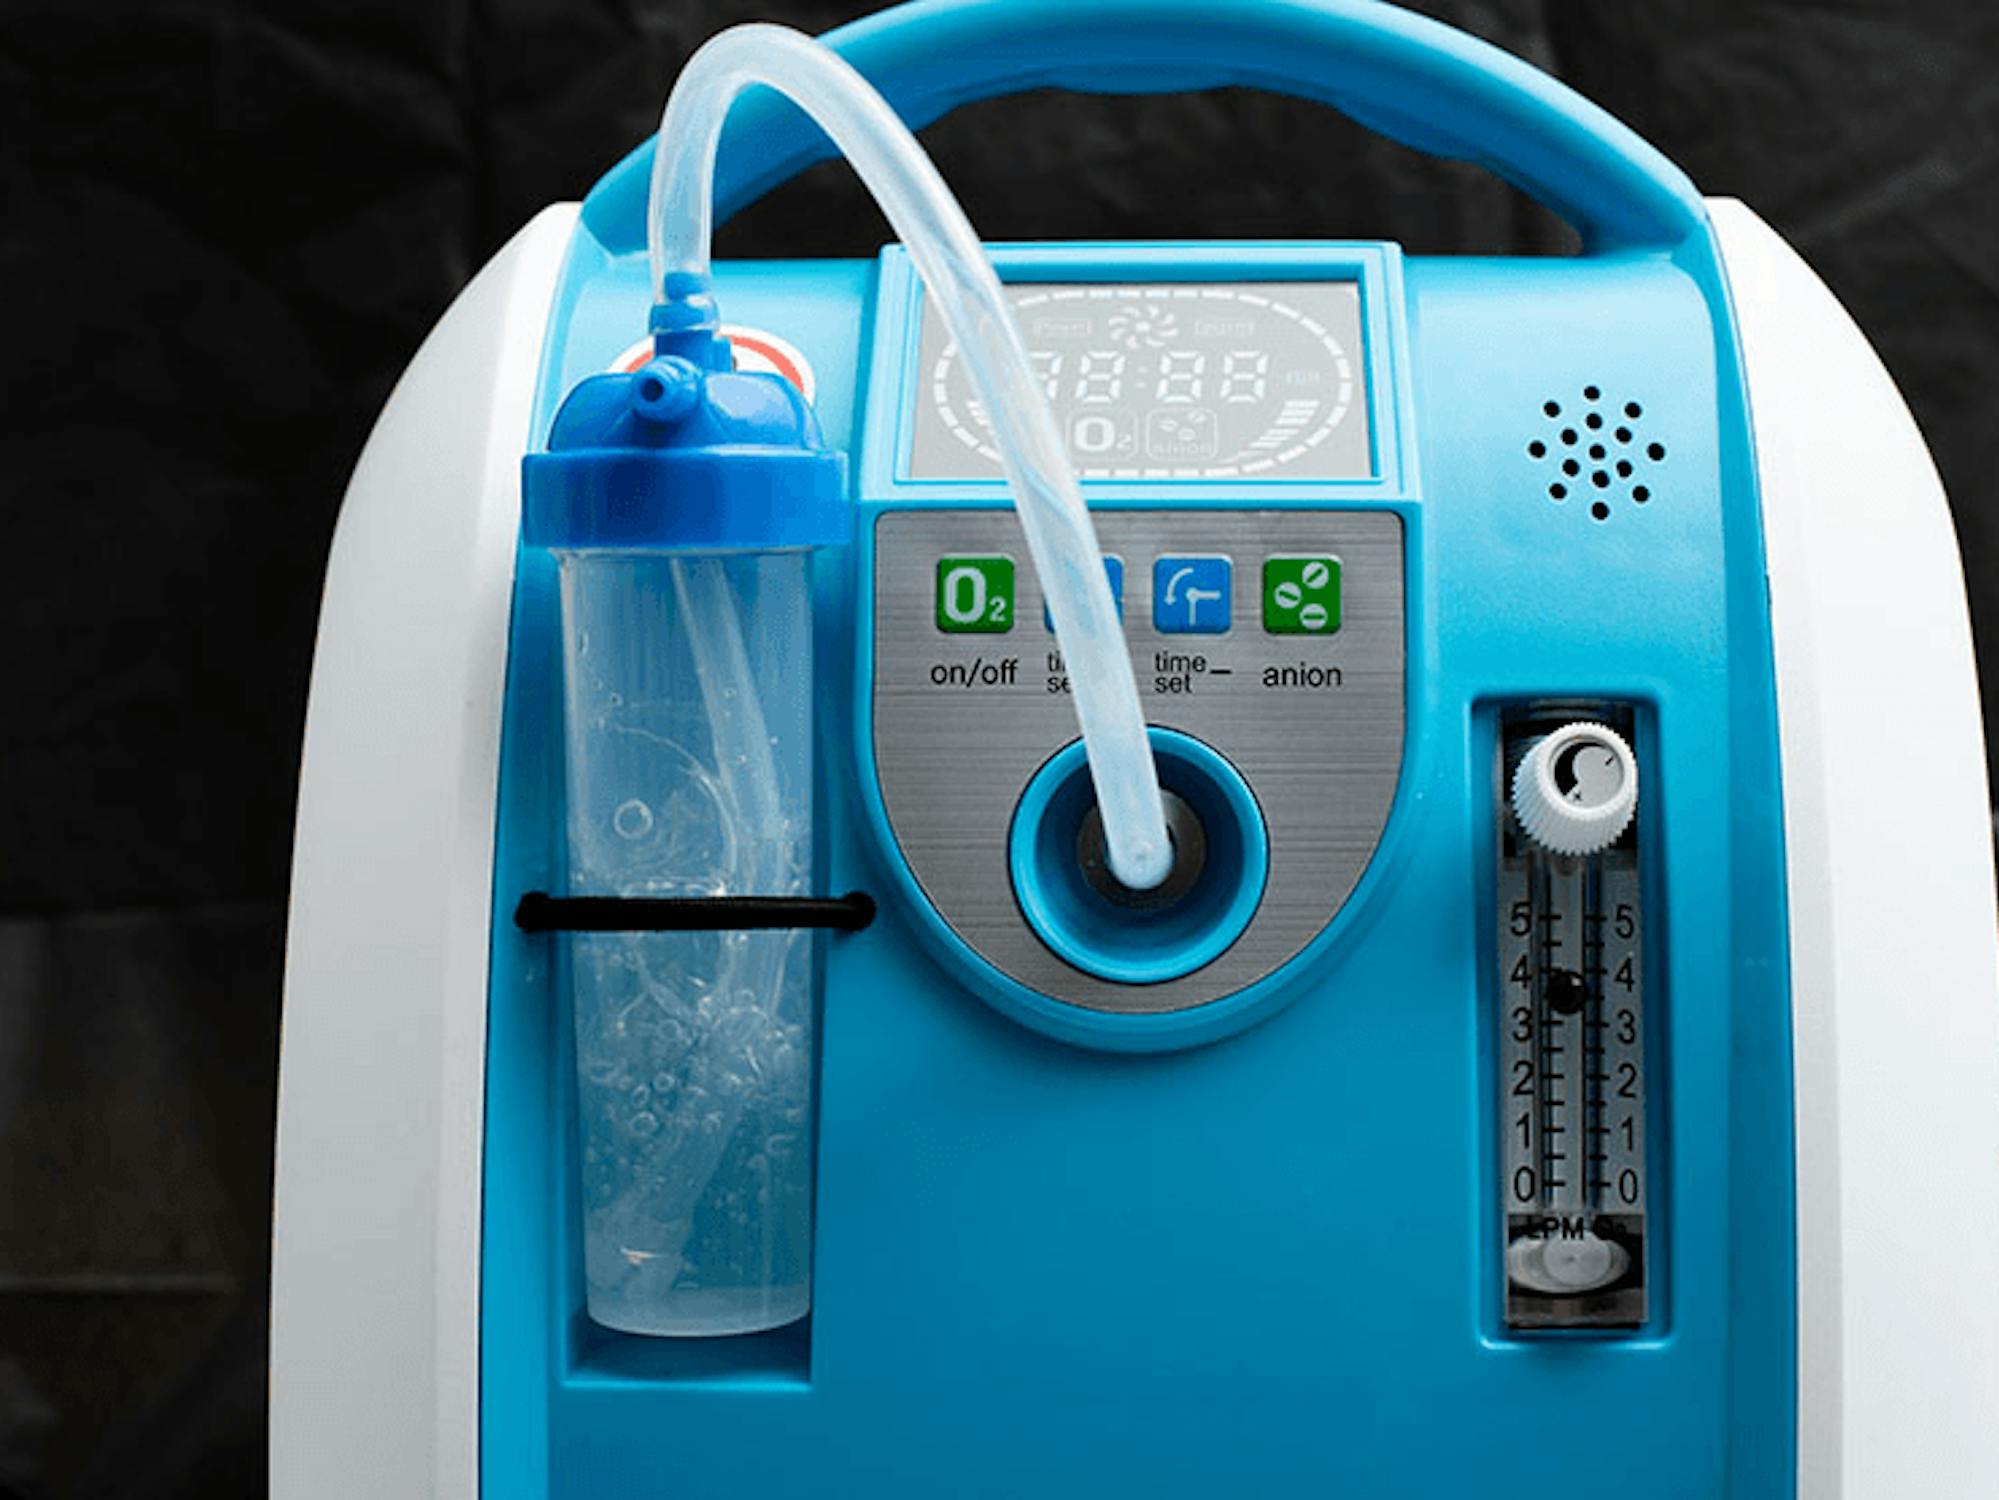 Does Medicare Cover Portable Oxygen Concentrators?